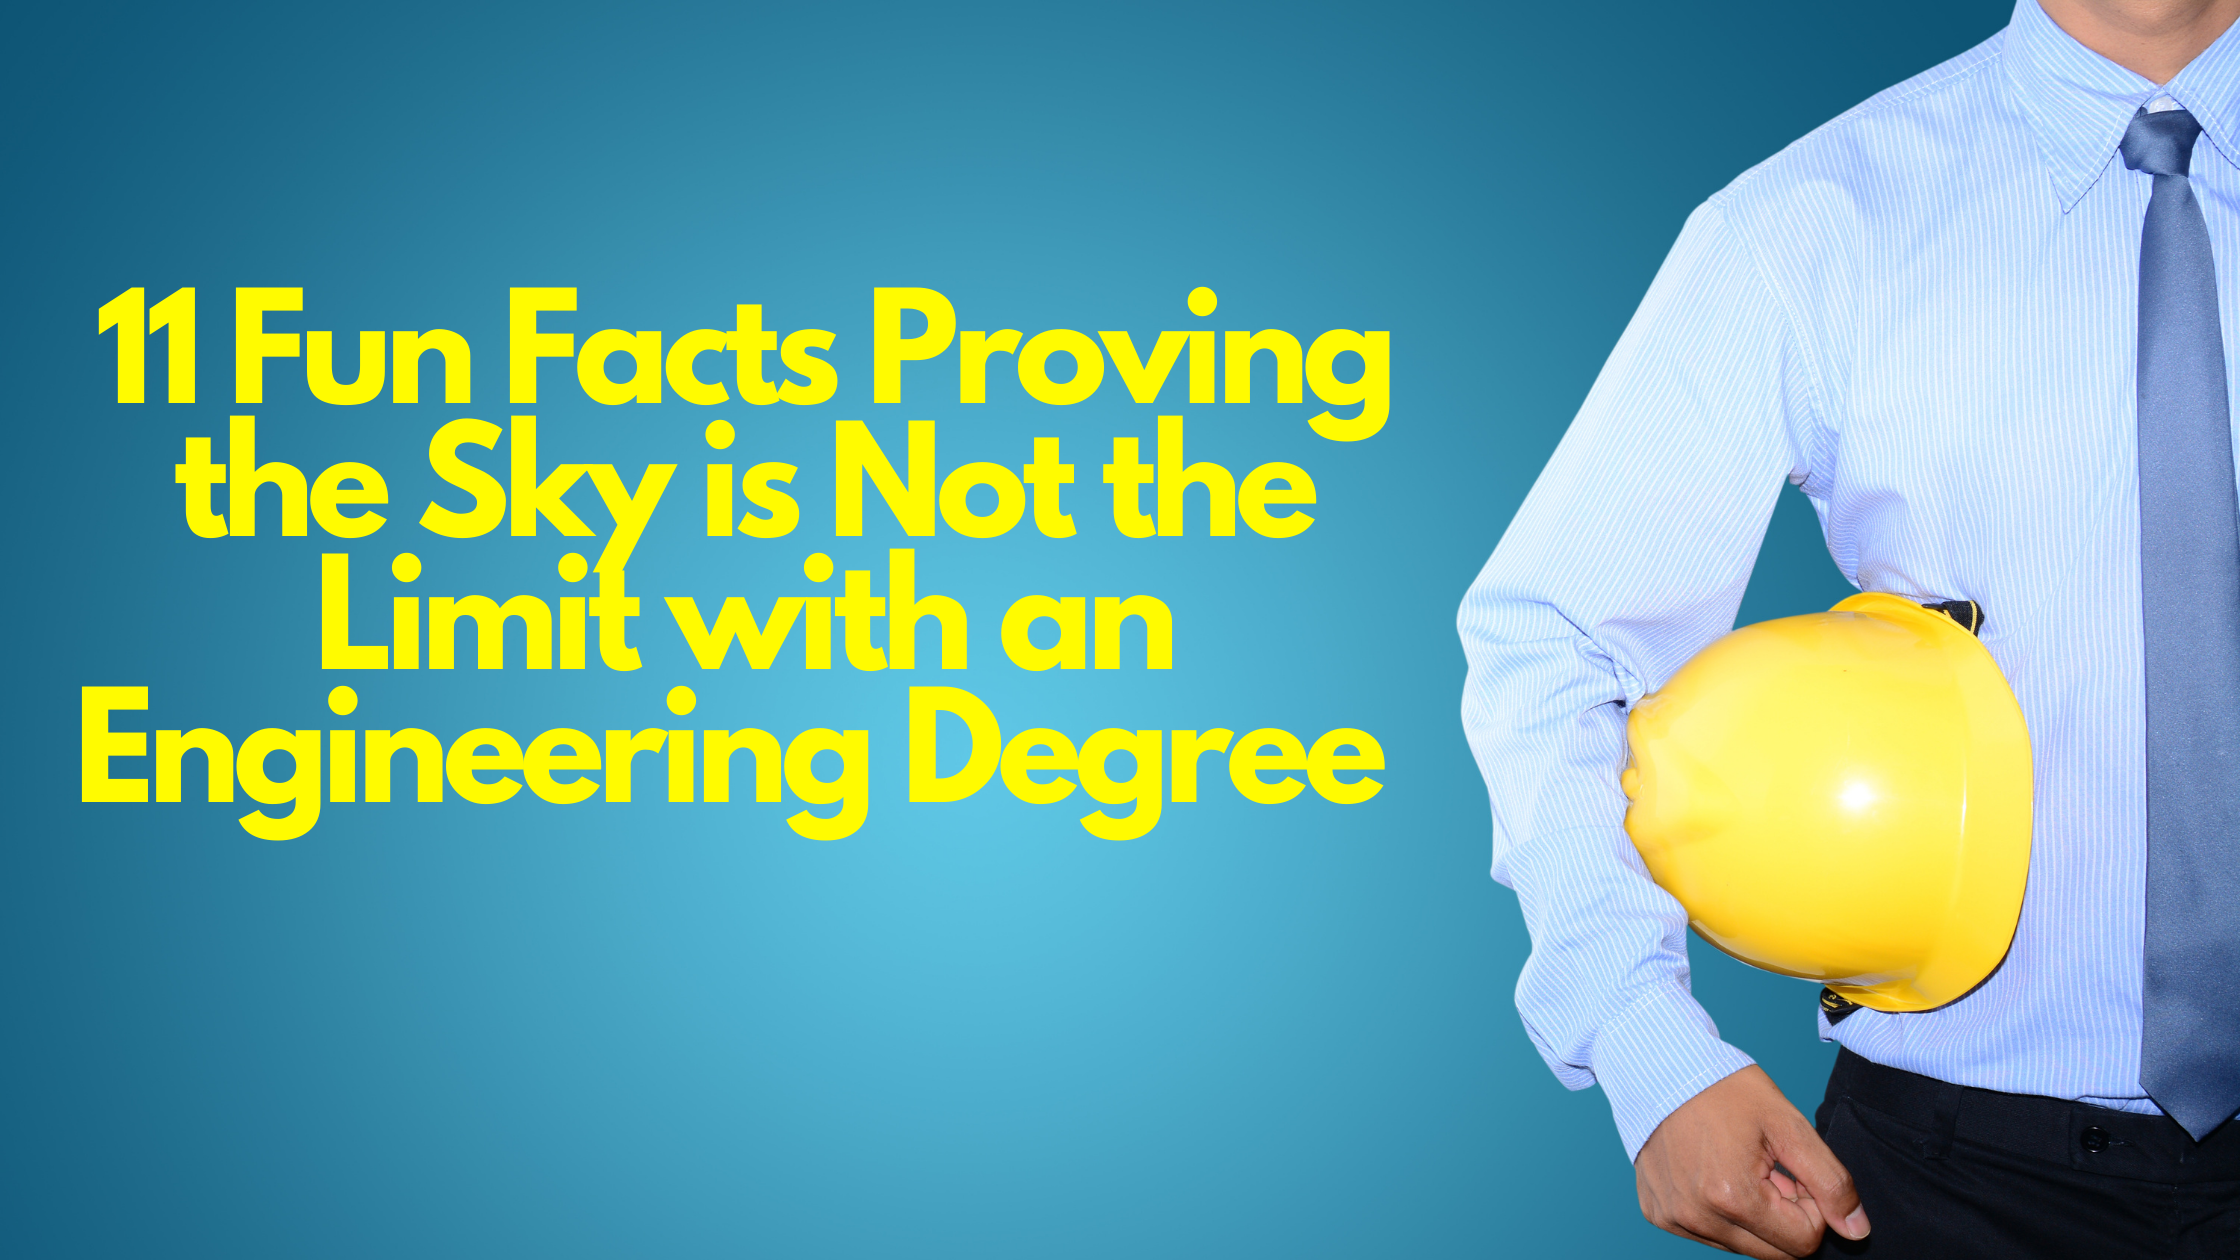 Image of 11 Fun Facts Proving the Sky is Not the Limit with an Engineering Degree  